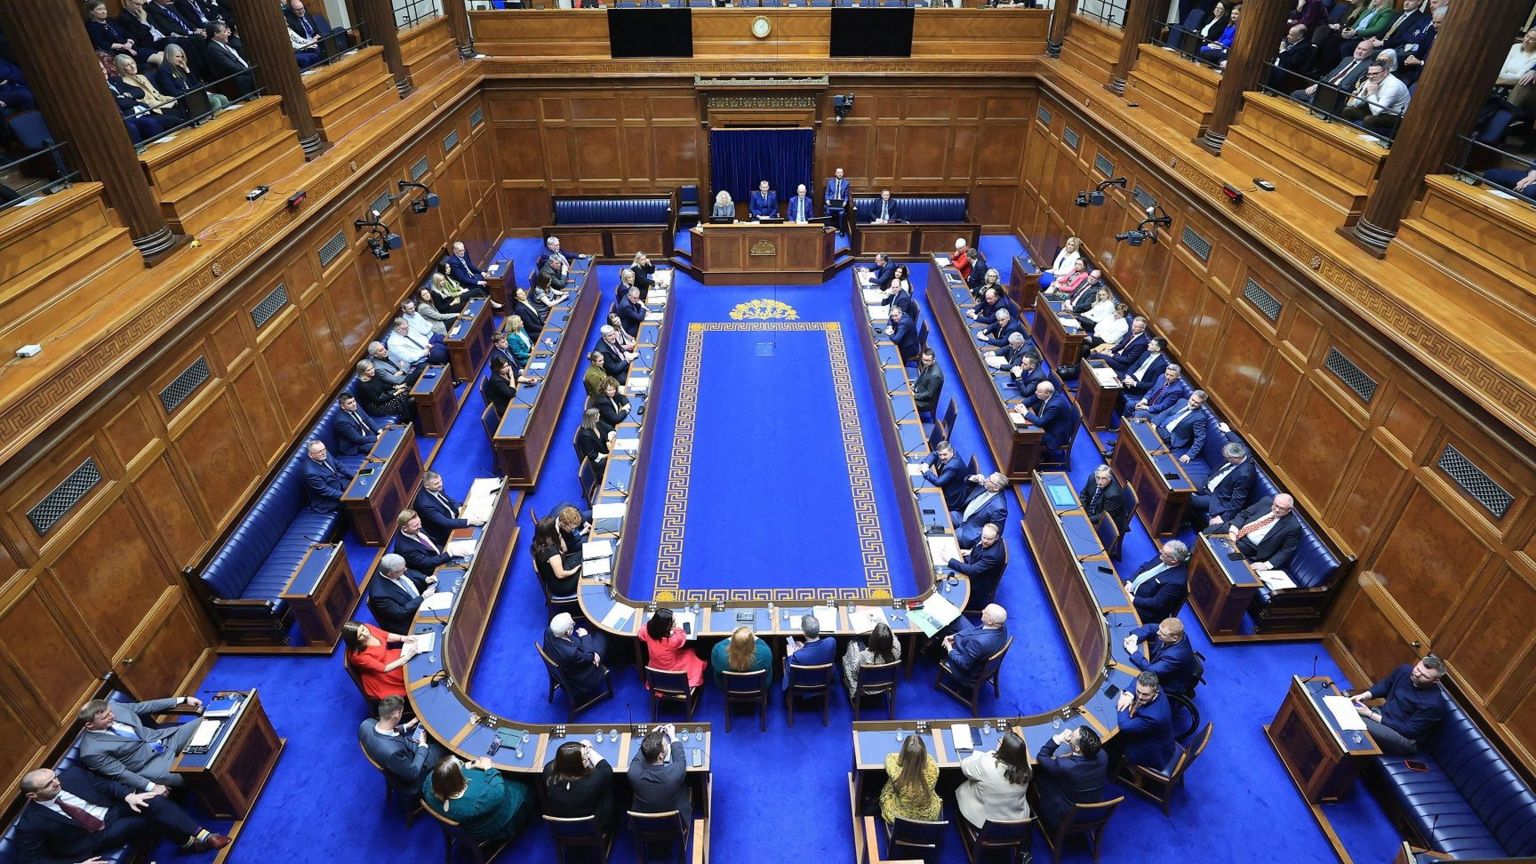 Inside of the Stormont chamber